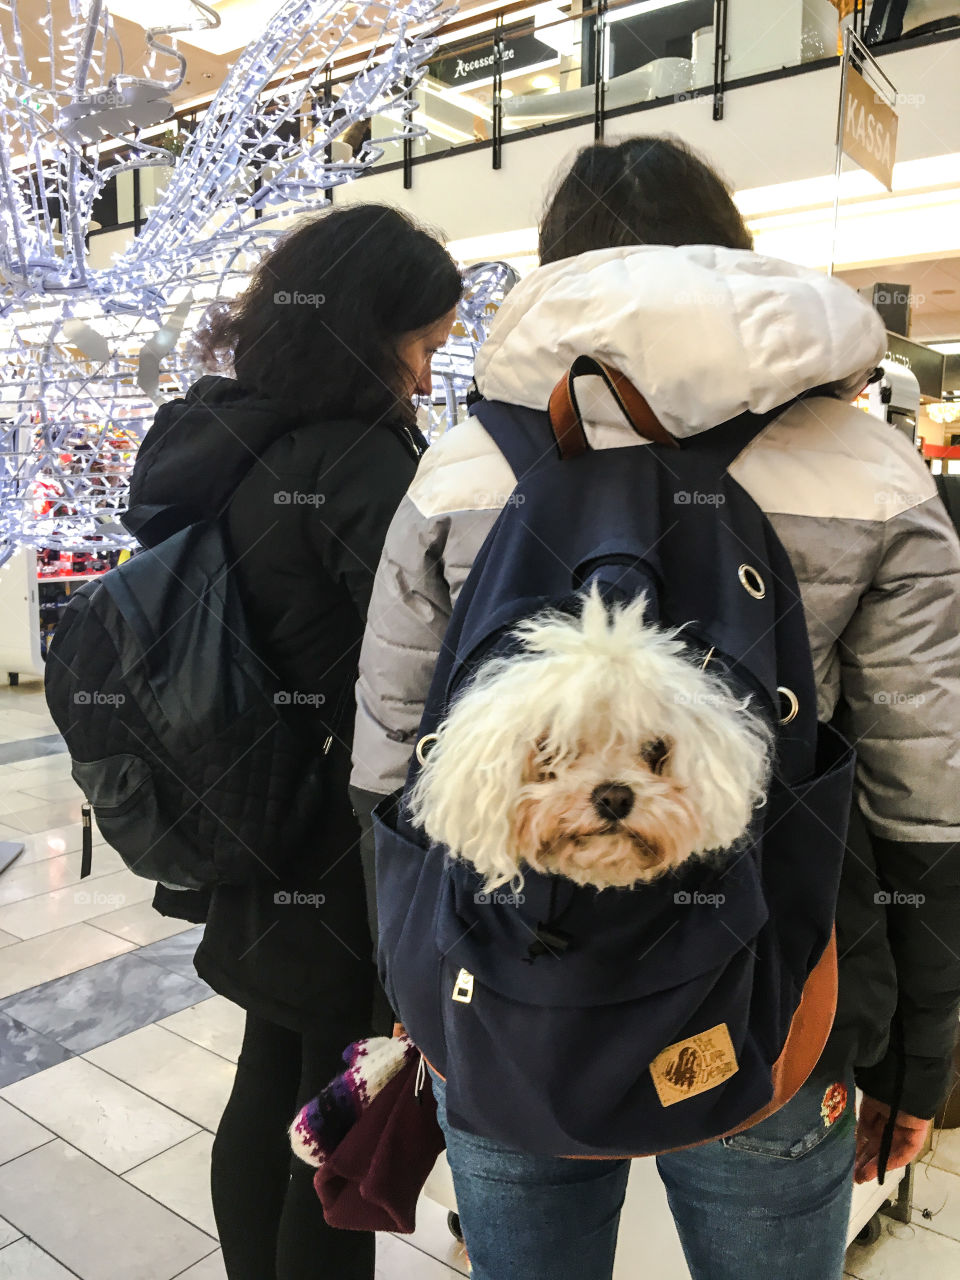 Dog in the Backpack